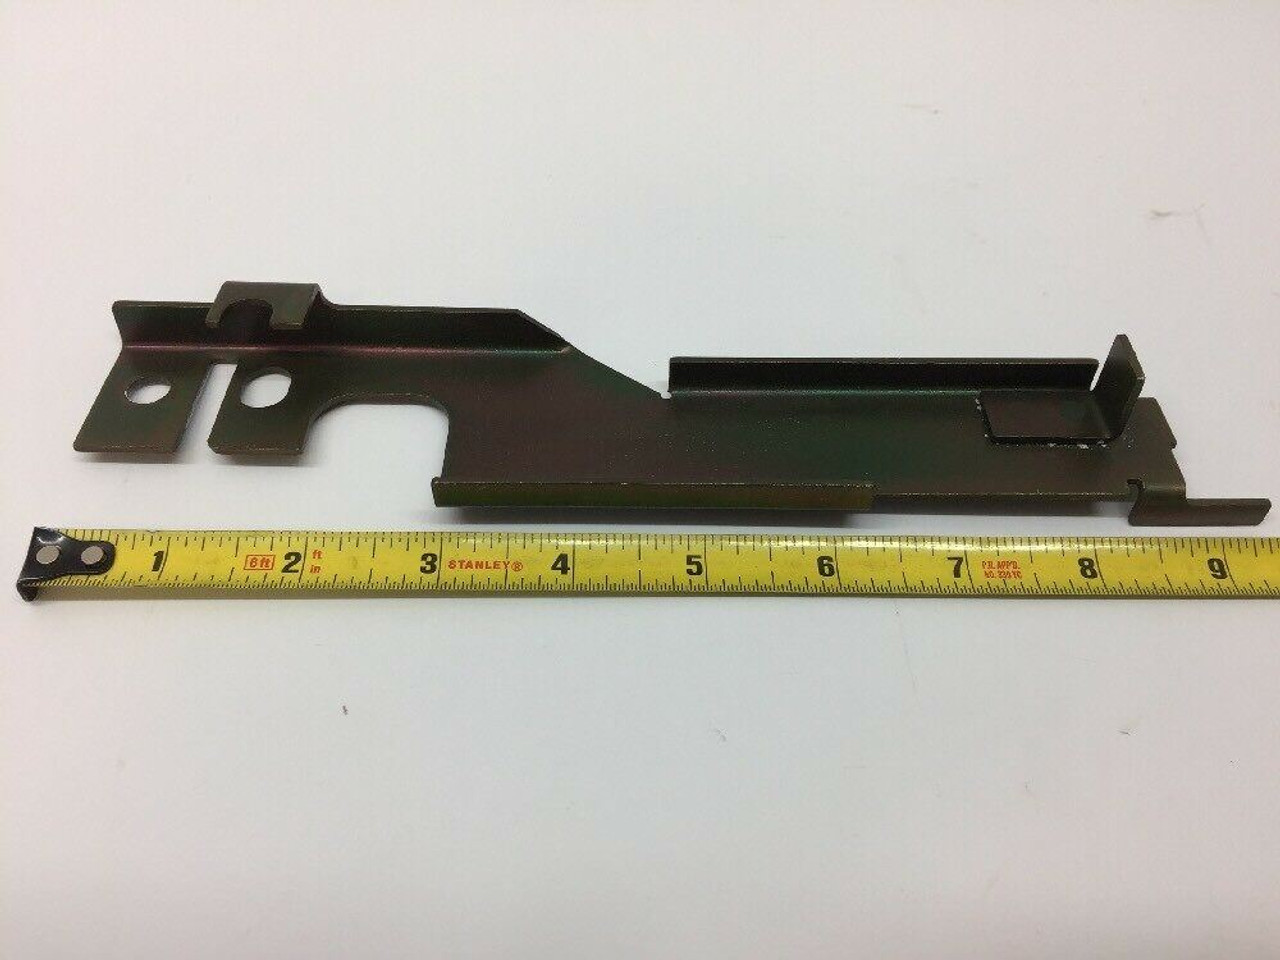 Mounting Bracket Assembly A3256669-3 Steel AME HMMWV